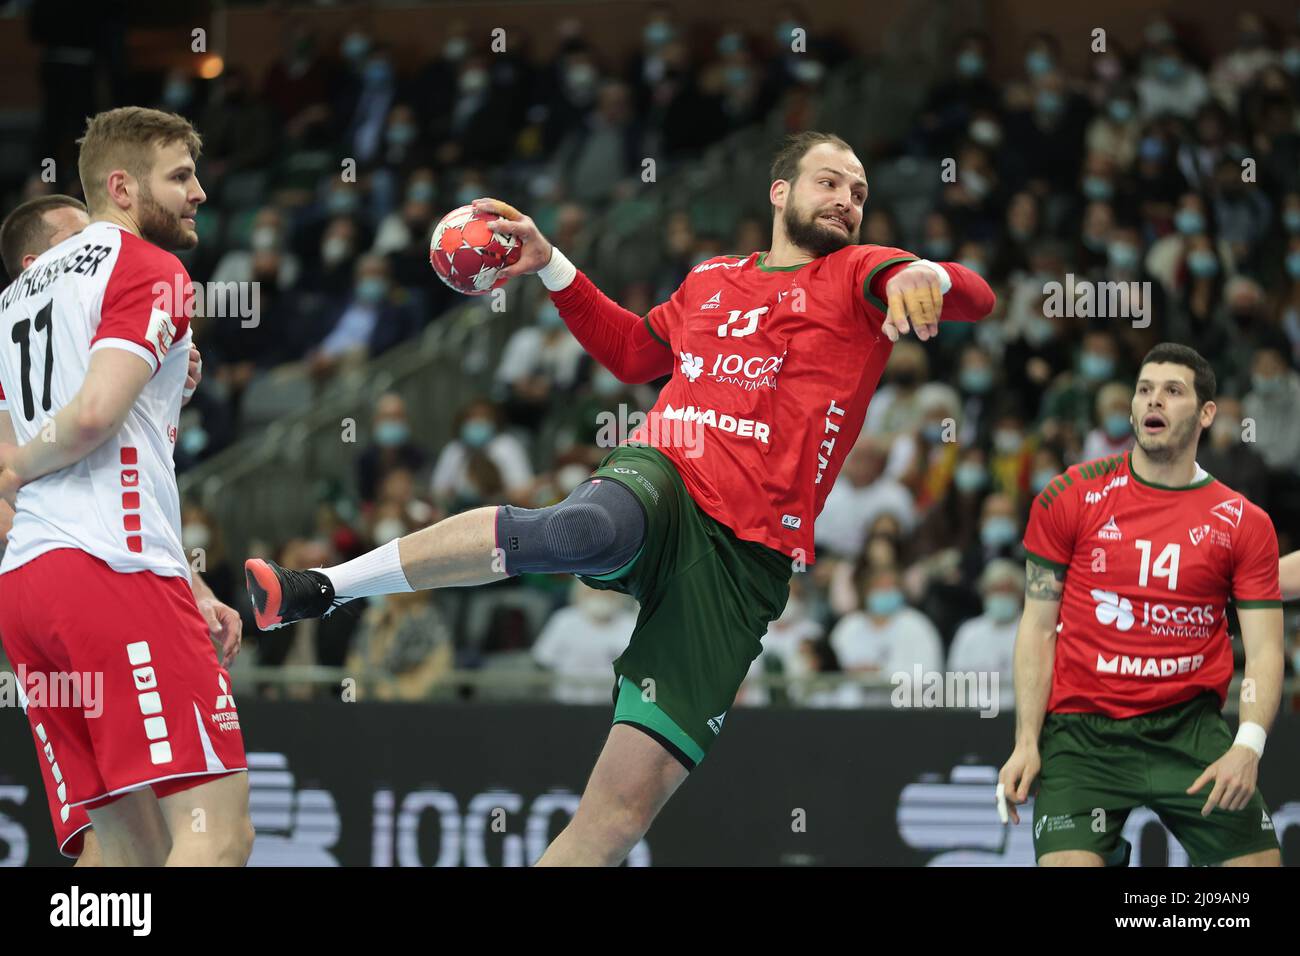 Guimaraes, Portugal. 17th Mar, 2022. Guimarães, 03/17/2022 - The Portugal  national team received the Swiss national team tonight, at the Multipurpose  Pavilion of Guimarães, in a Play-Off game for the 2023 Handball